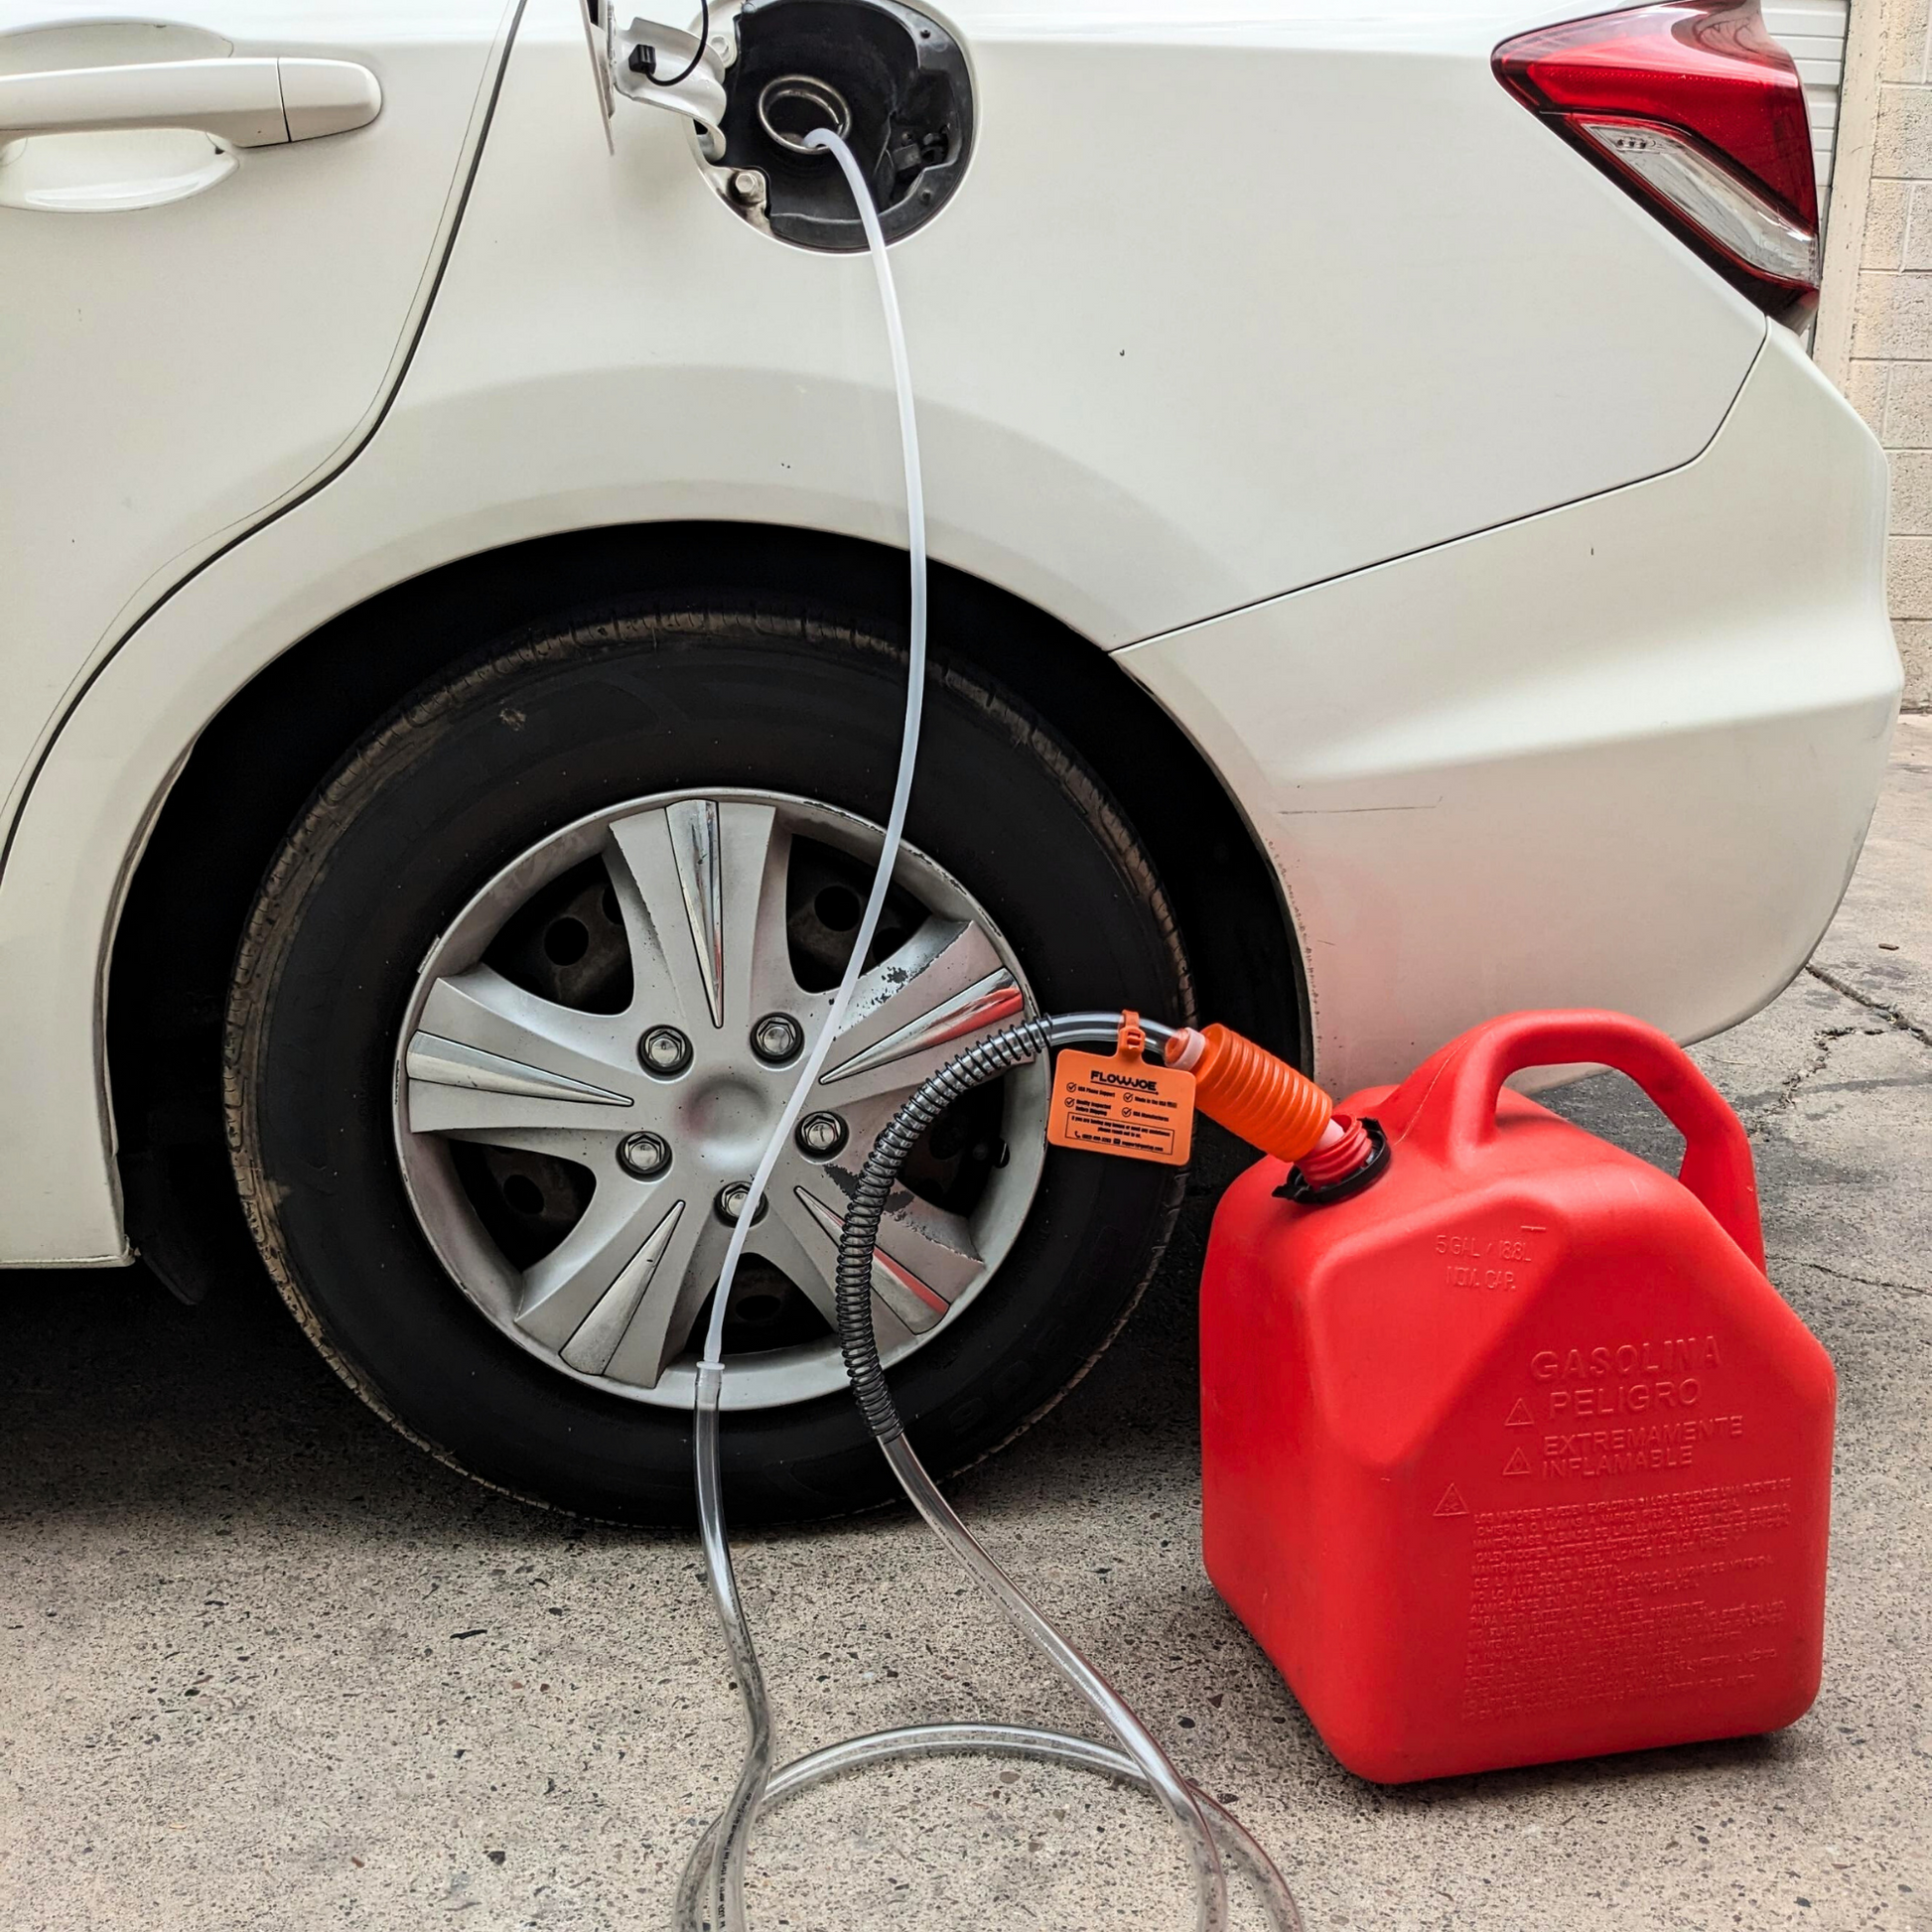 Handy Pump manual fuel transfer siphon moving gasoline from white car to red gas can 